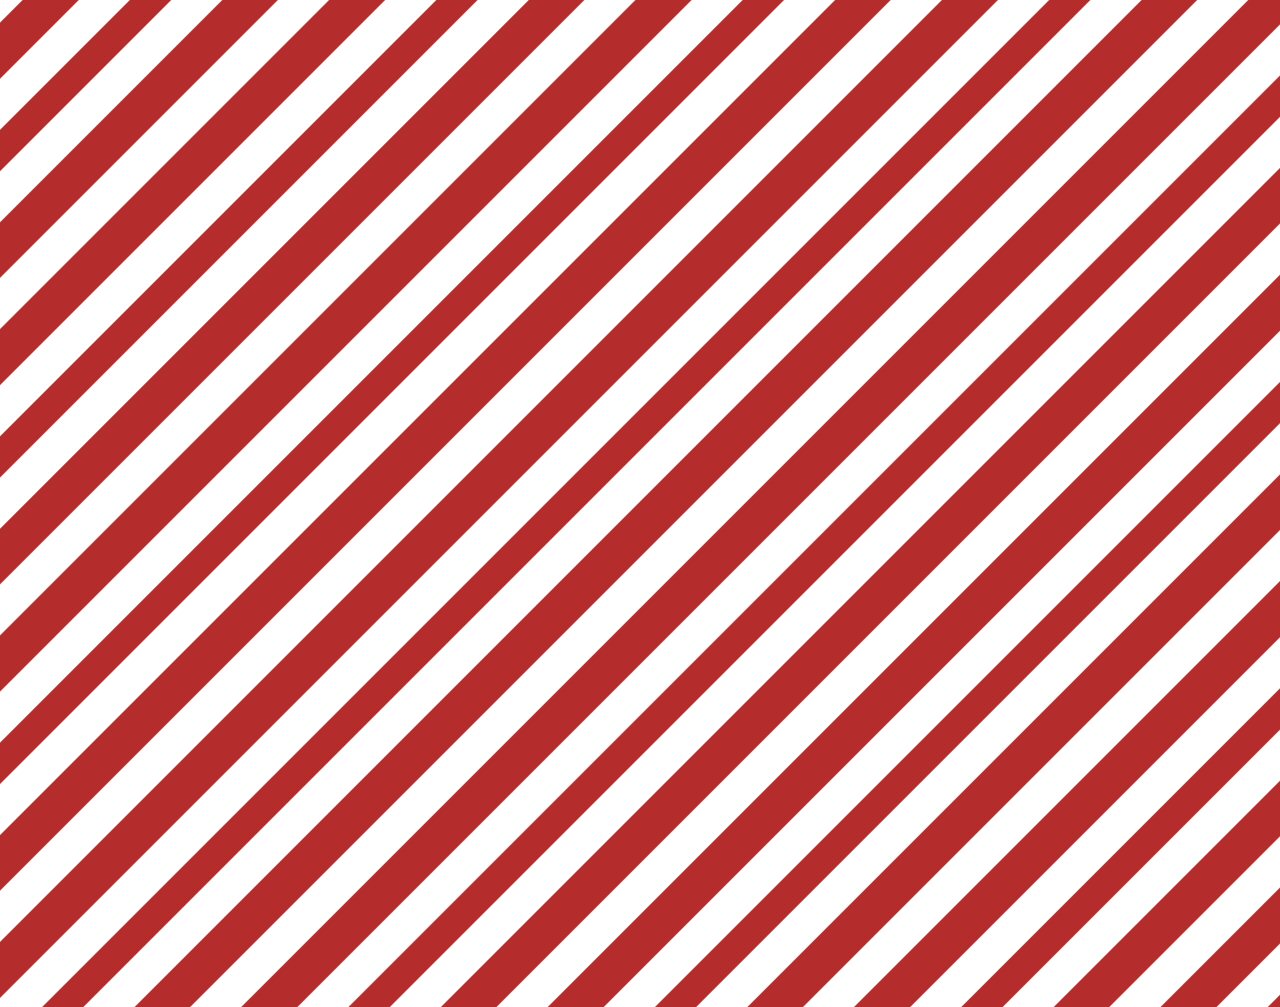 Candy Cane Stripes images